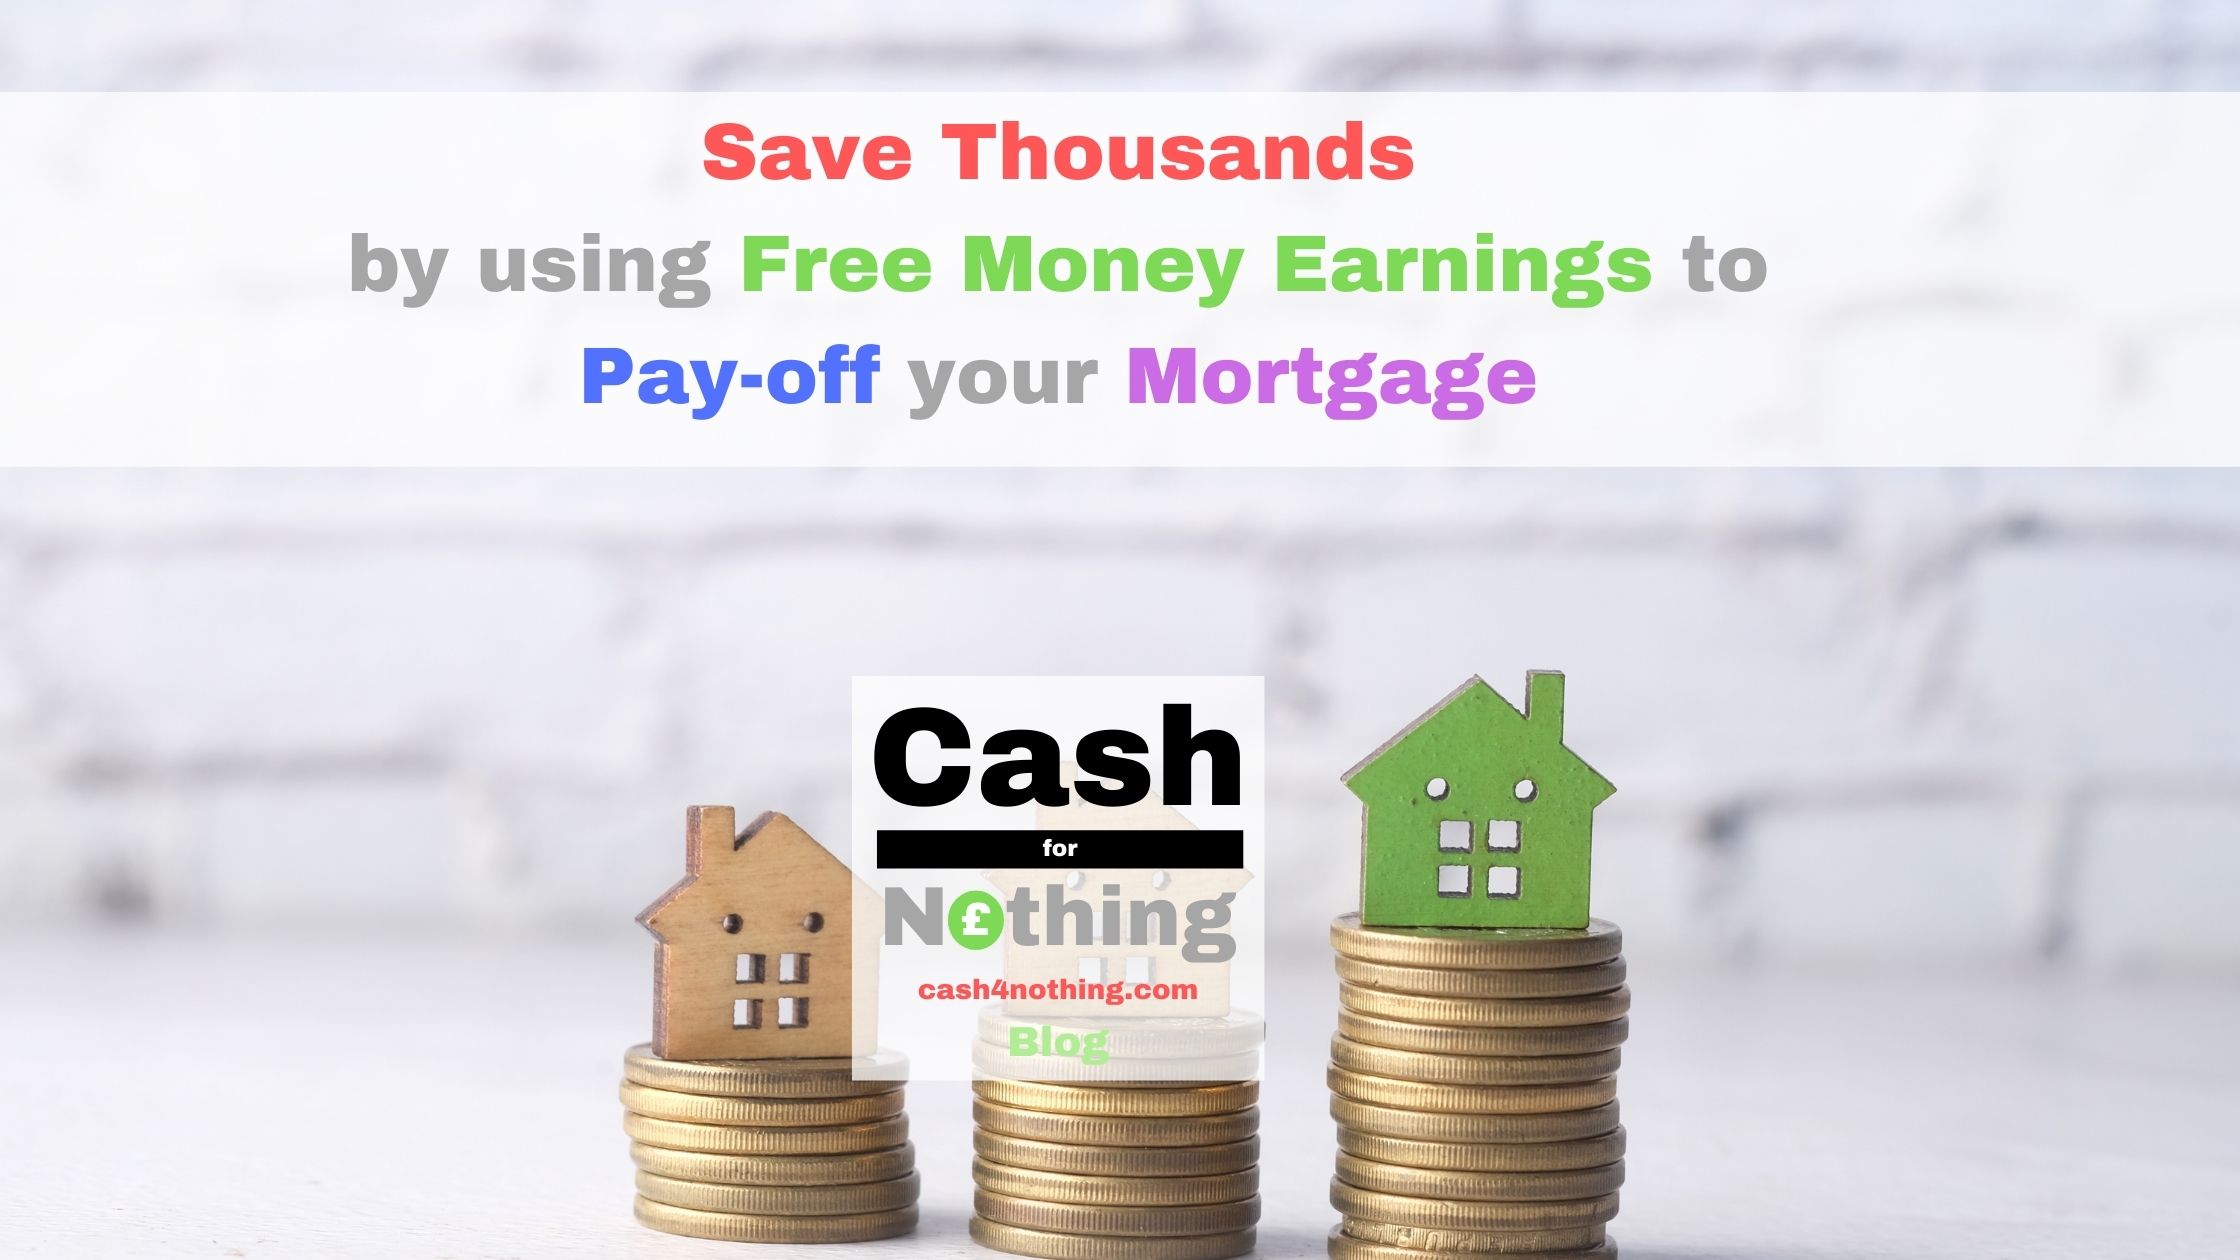 Pay-off your Mortgage with Free Money and save Thousands